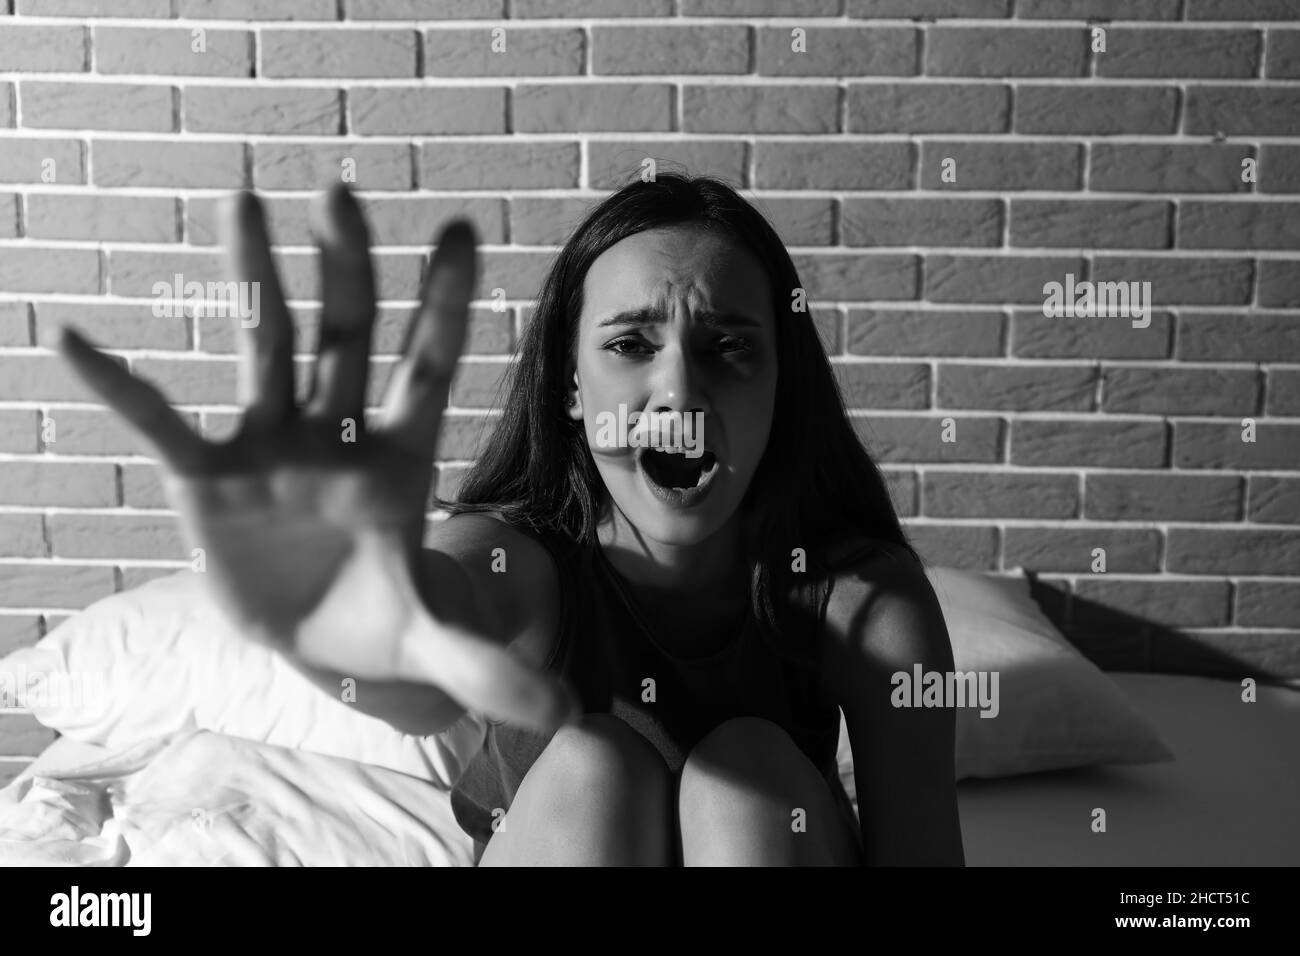 Scared young woman on bed. Violence concept Stock Photo